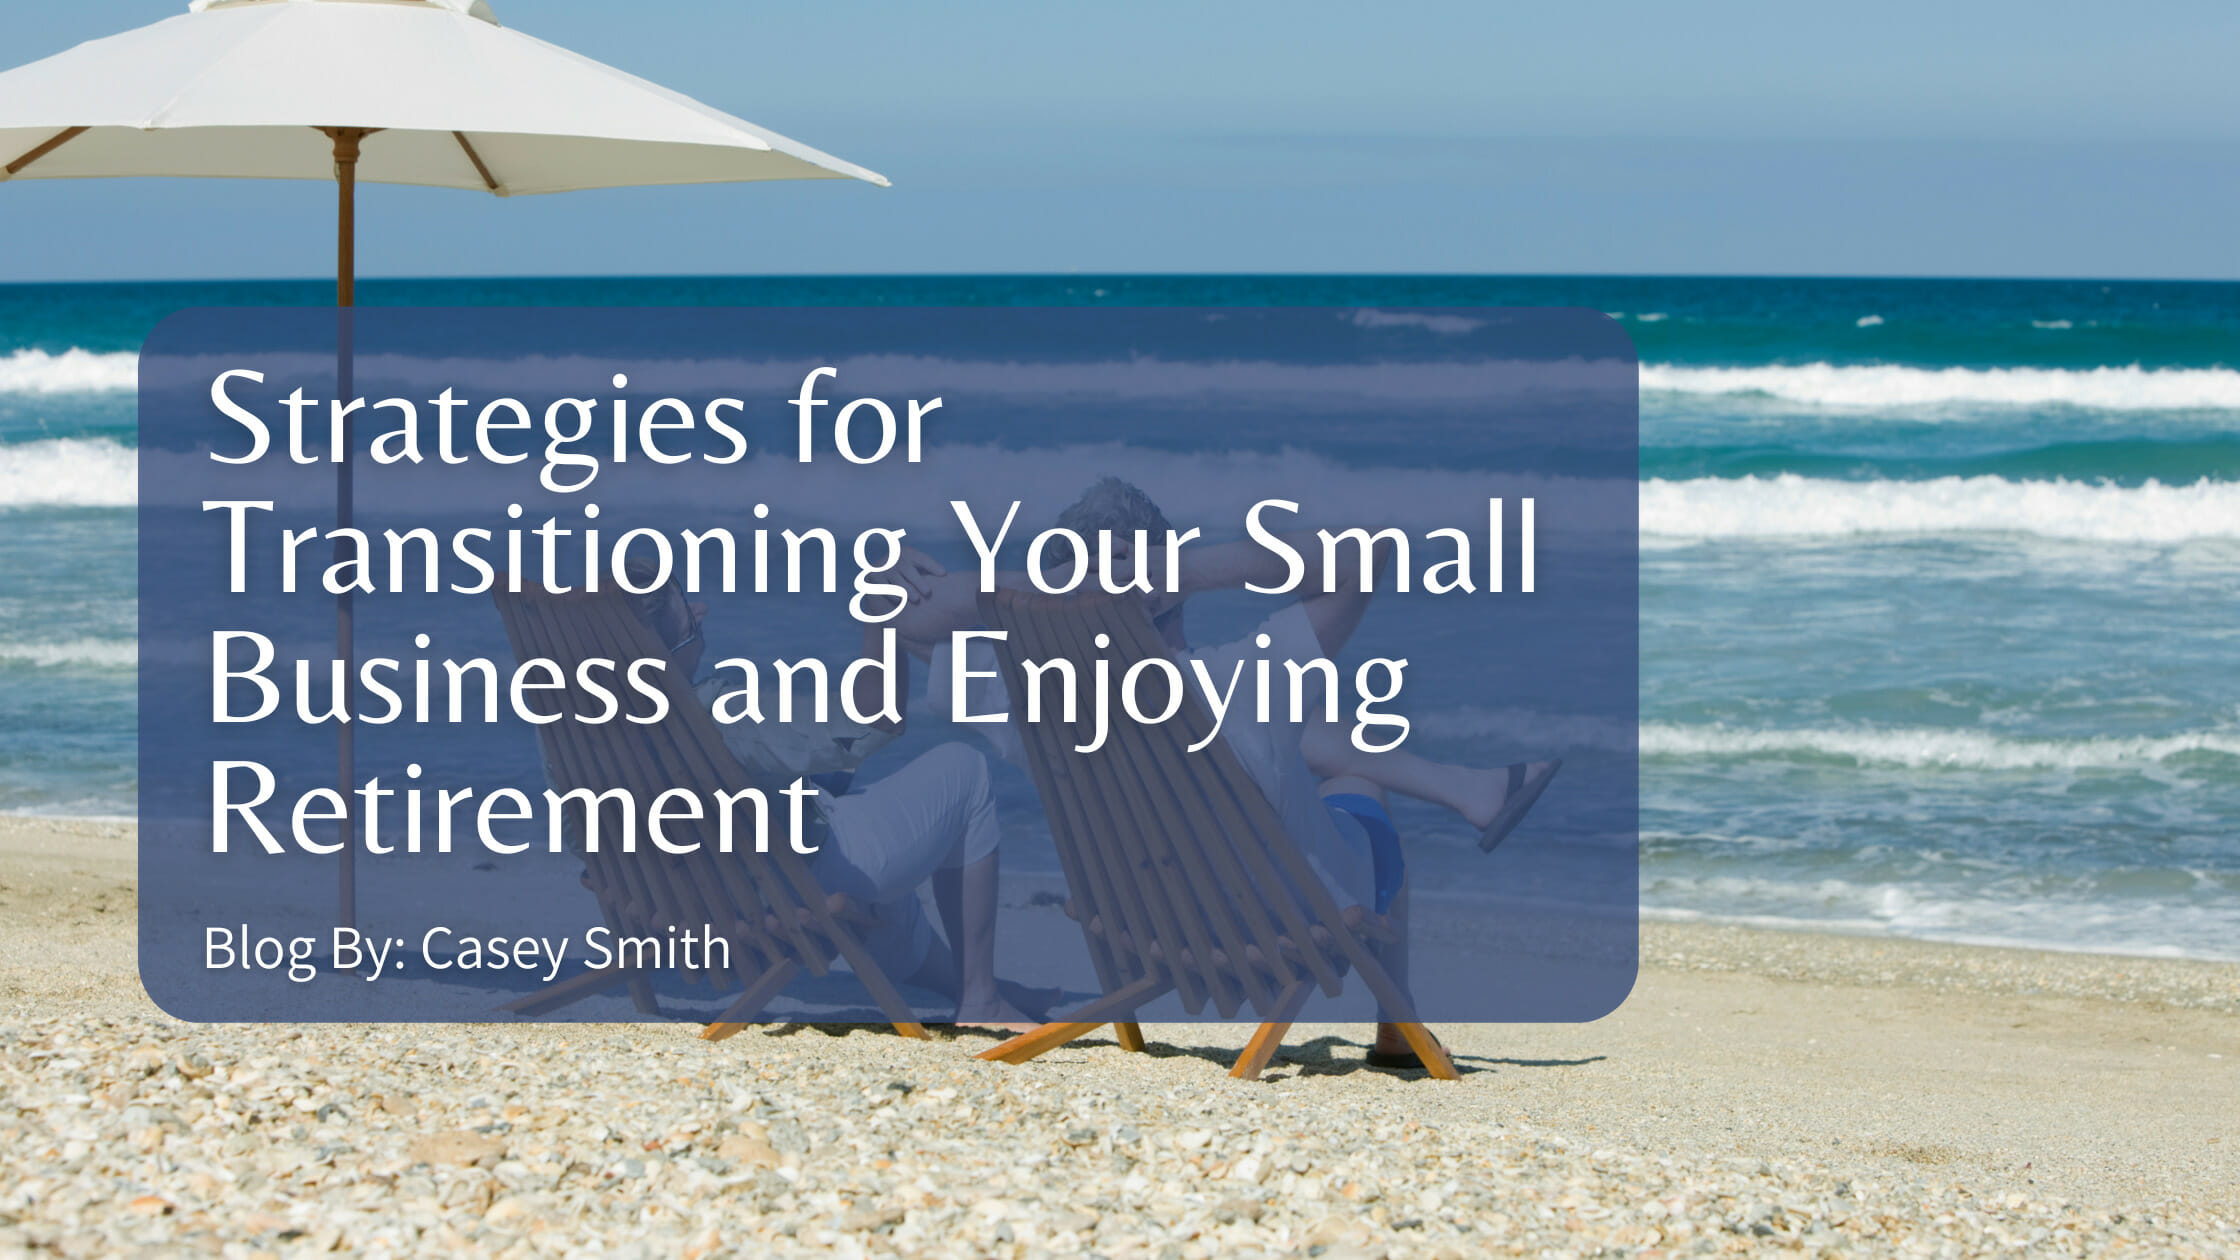 Strategies for Transitioning Your Small Business and Enjoying Retirement